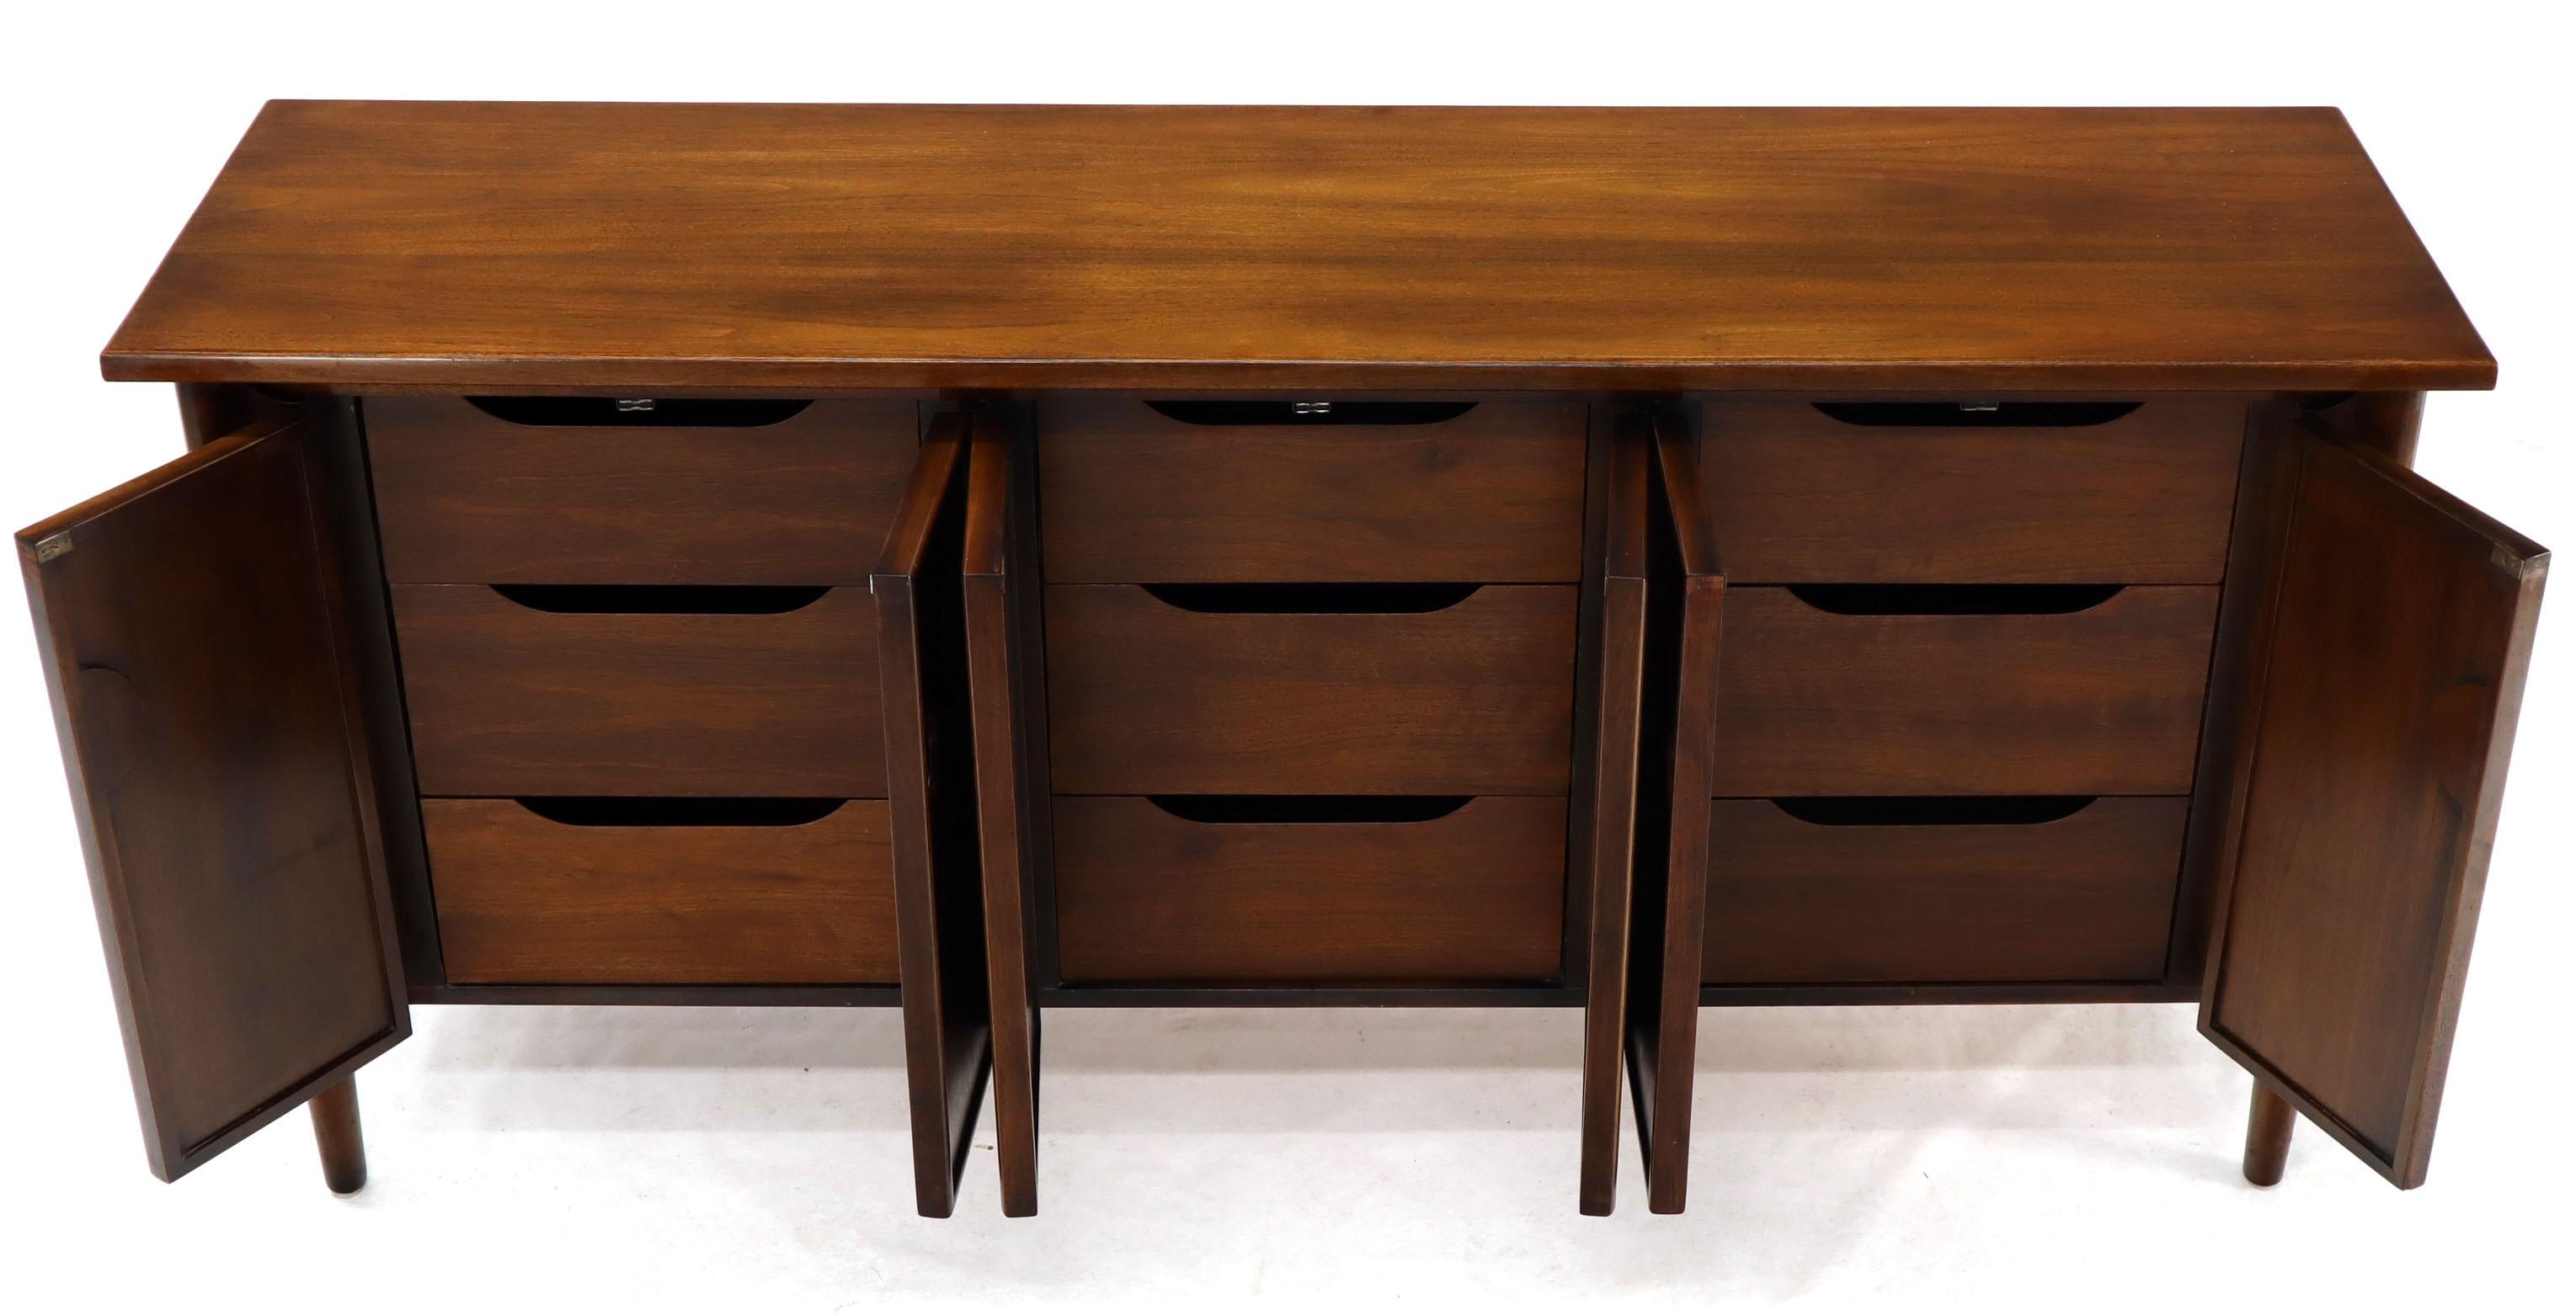 20th Century Exposed Sculptural Legs Nine Drawers Long Dresser Credenza For Sale